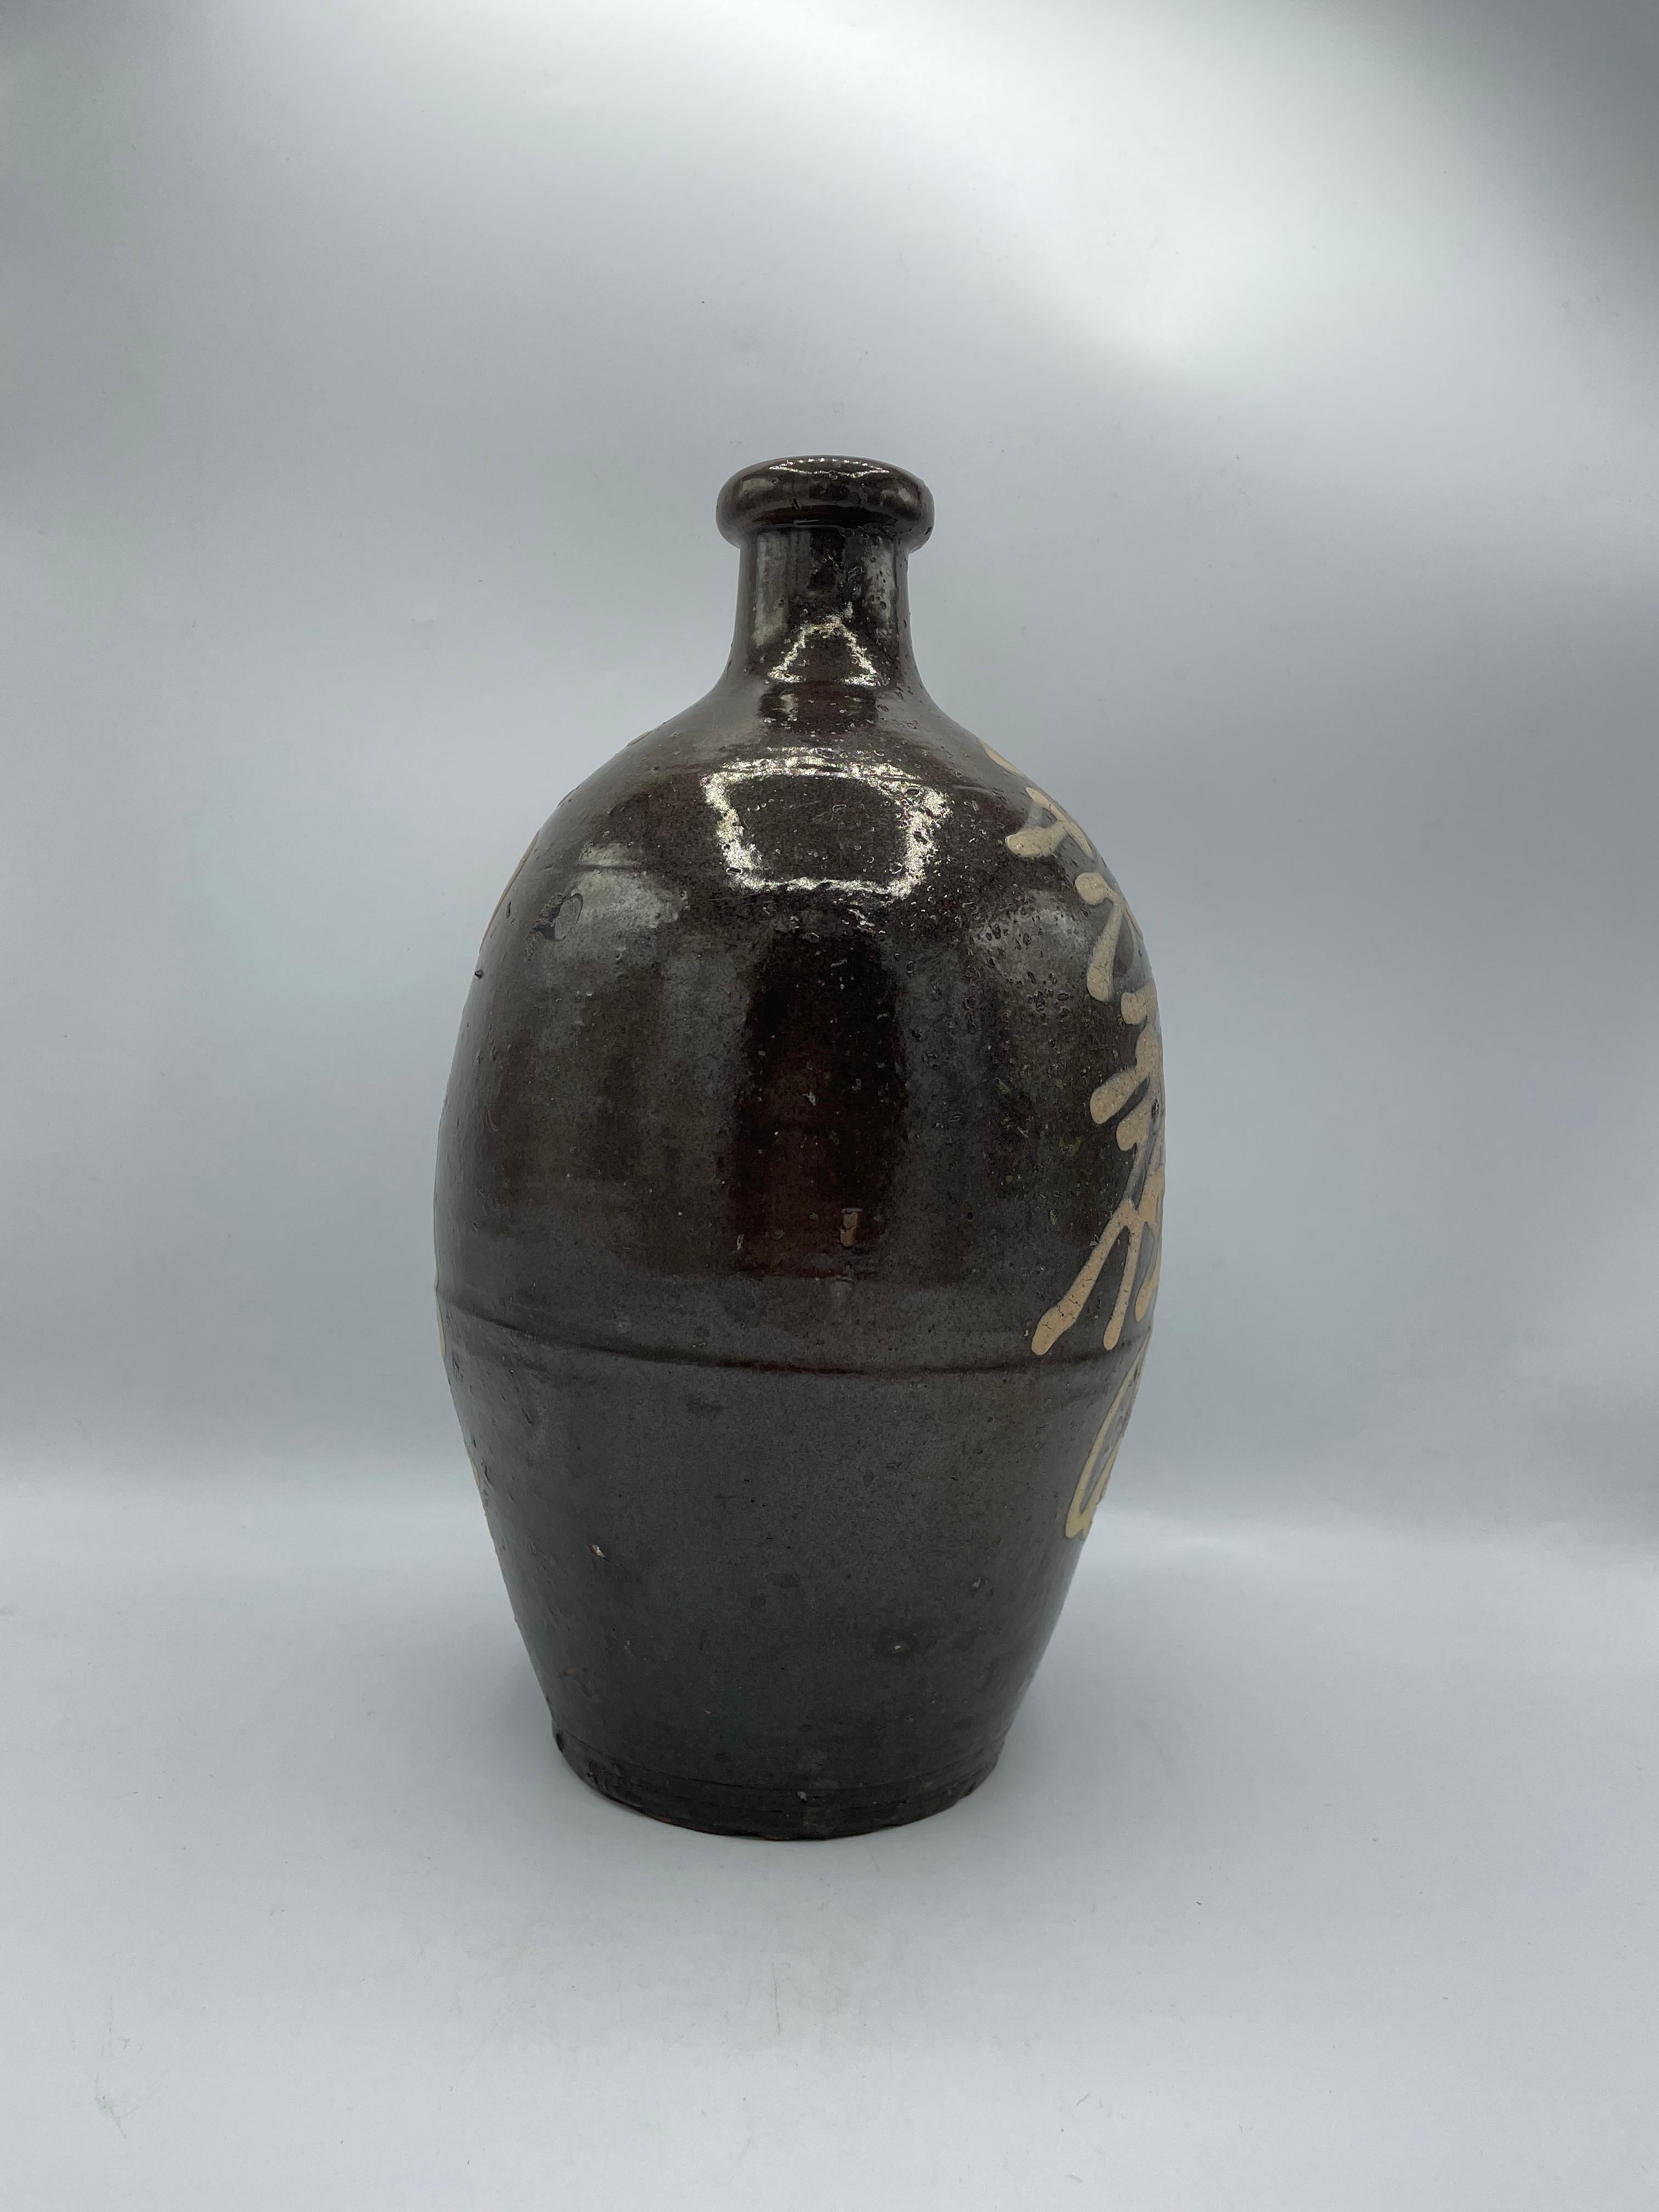 This is a sake bottle called 'Kayoi tokkuri' or 'Binbo tokkuri'. It is made with a porcelain and it is written Manazuru-machi and Fukubi.
Manazuru-machi is the city name and it is located in Ohita prefecture.
This bottle was made in Japan around